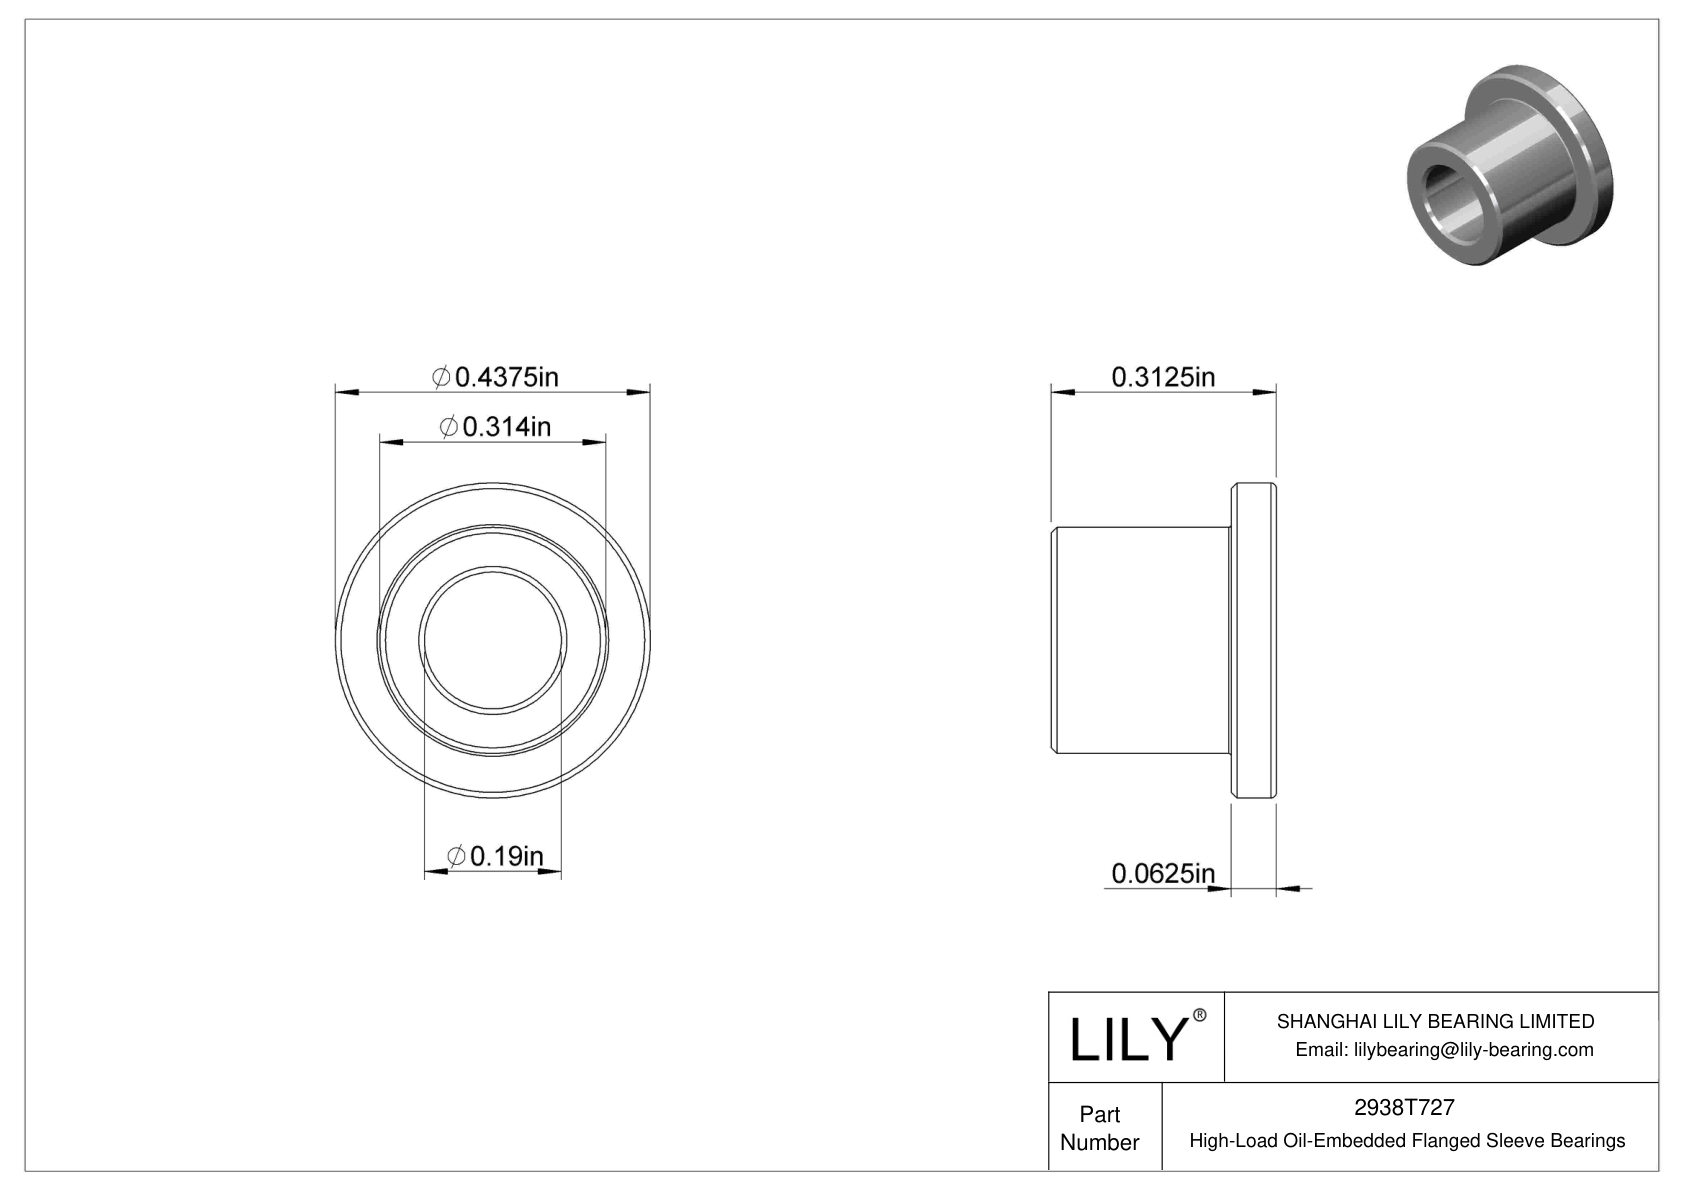 CJDITHCH High-Load Oil-Embedded Flanged Sleeve Bearings cad drawing